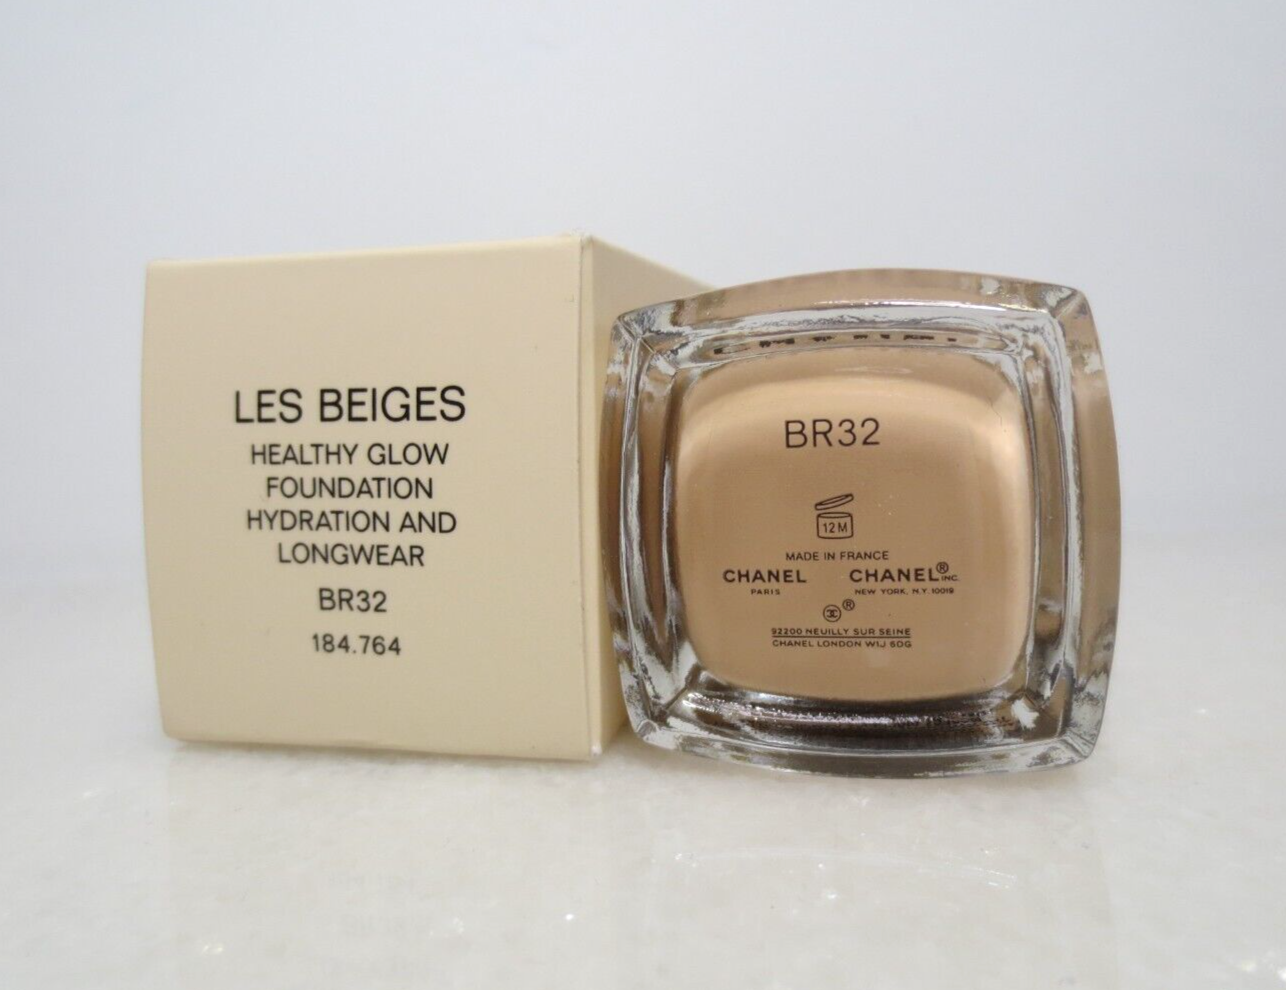 CHANEL LES BEIGES / / SHEER HEALTHY GLOW HIGHLIGHTING FLUID -- SUNKISSED /  / SWATCH & REVIEW. 